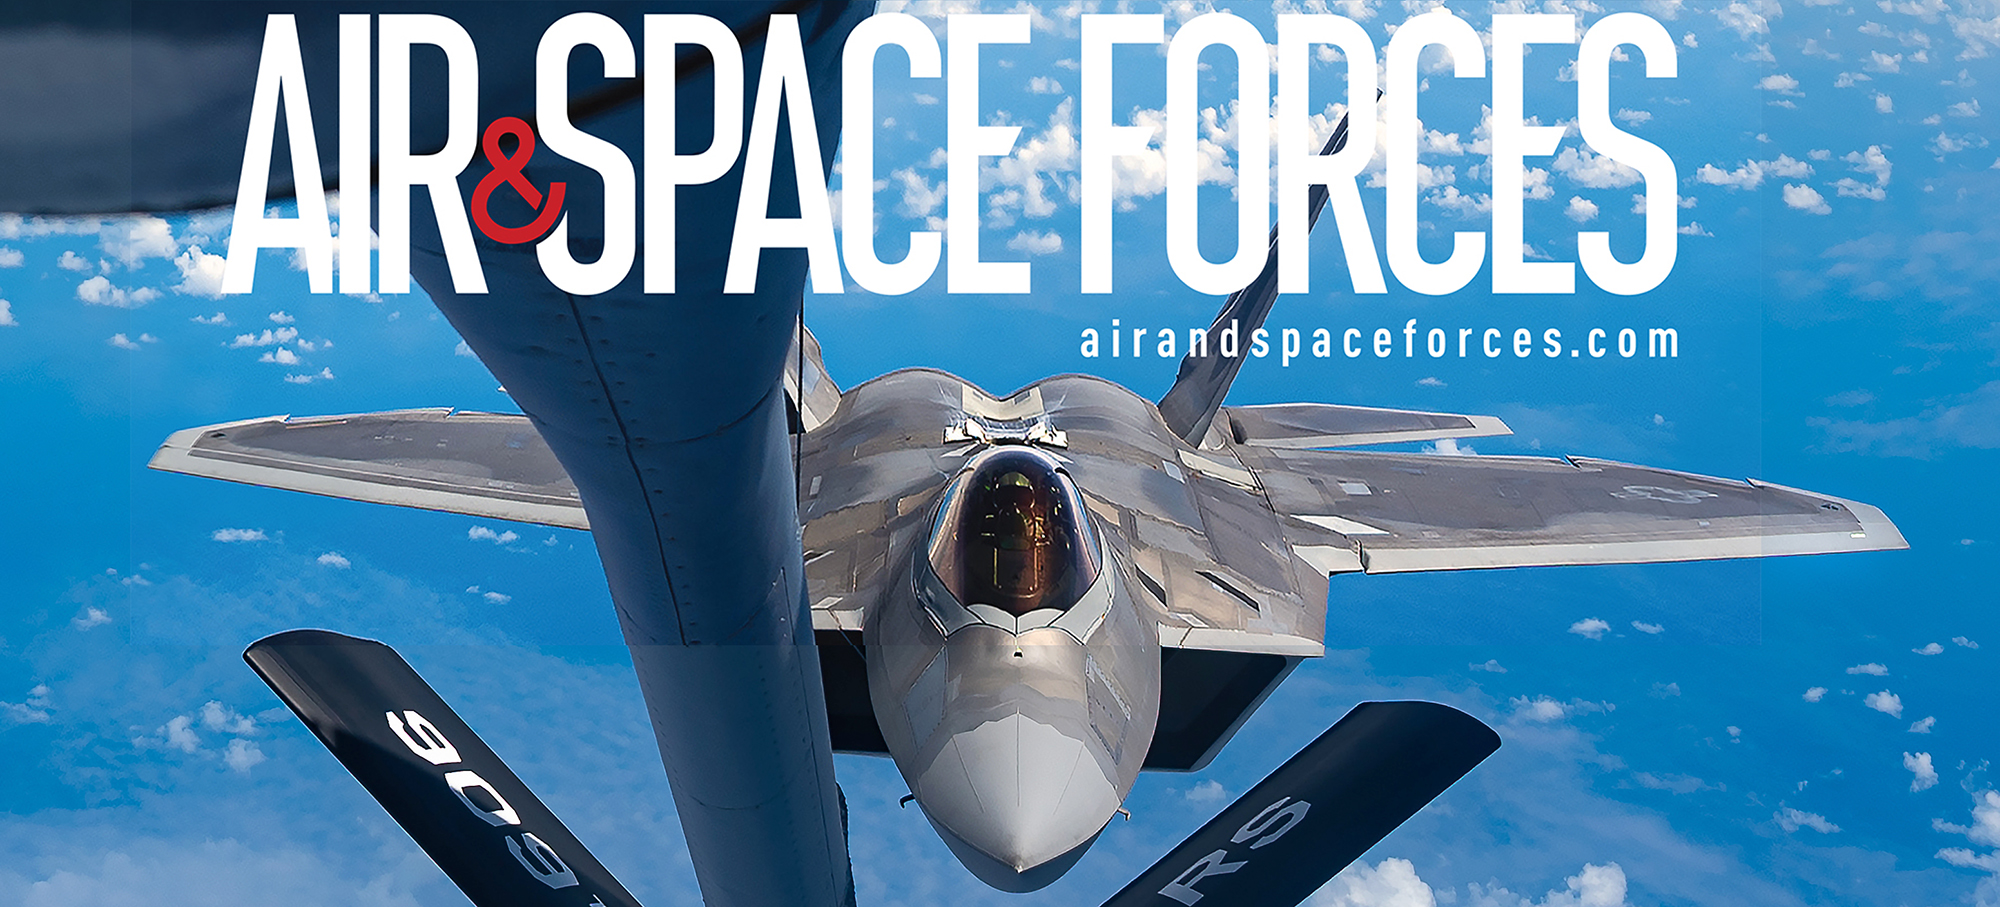 Air & Space Forces Magazine Recognized for ‘Journalism Excellence’